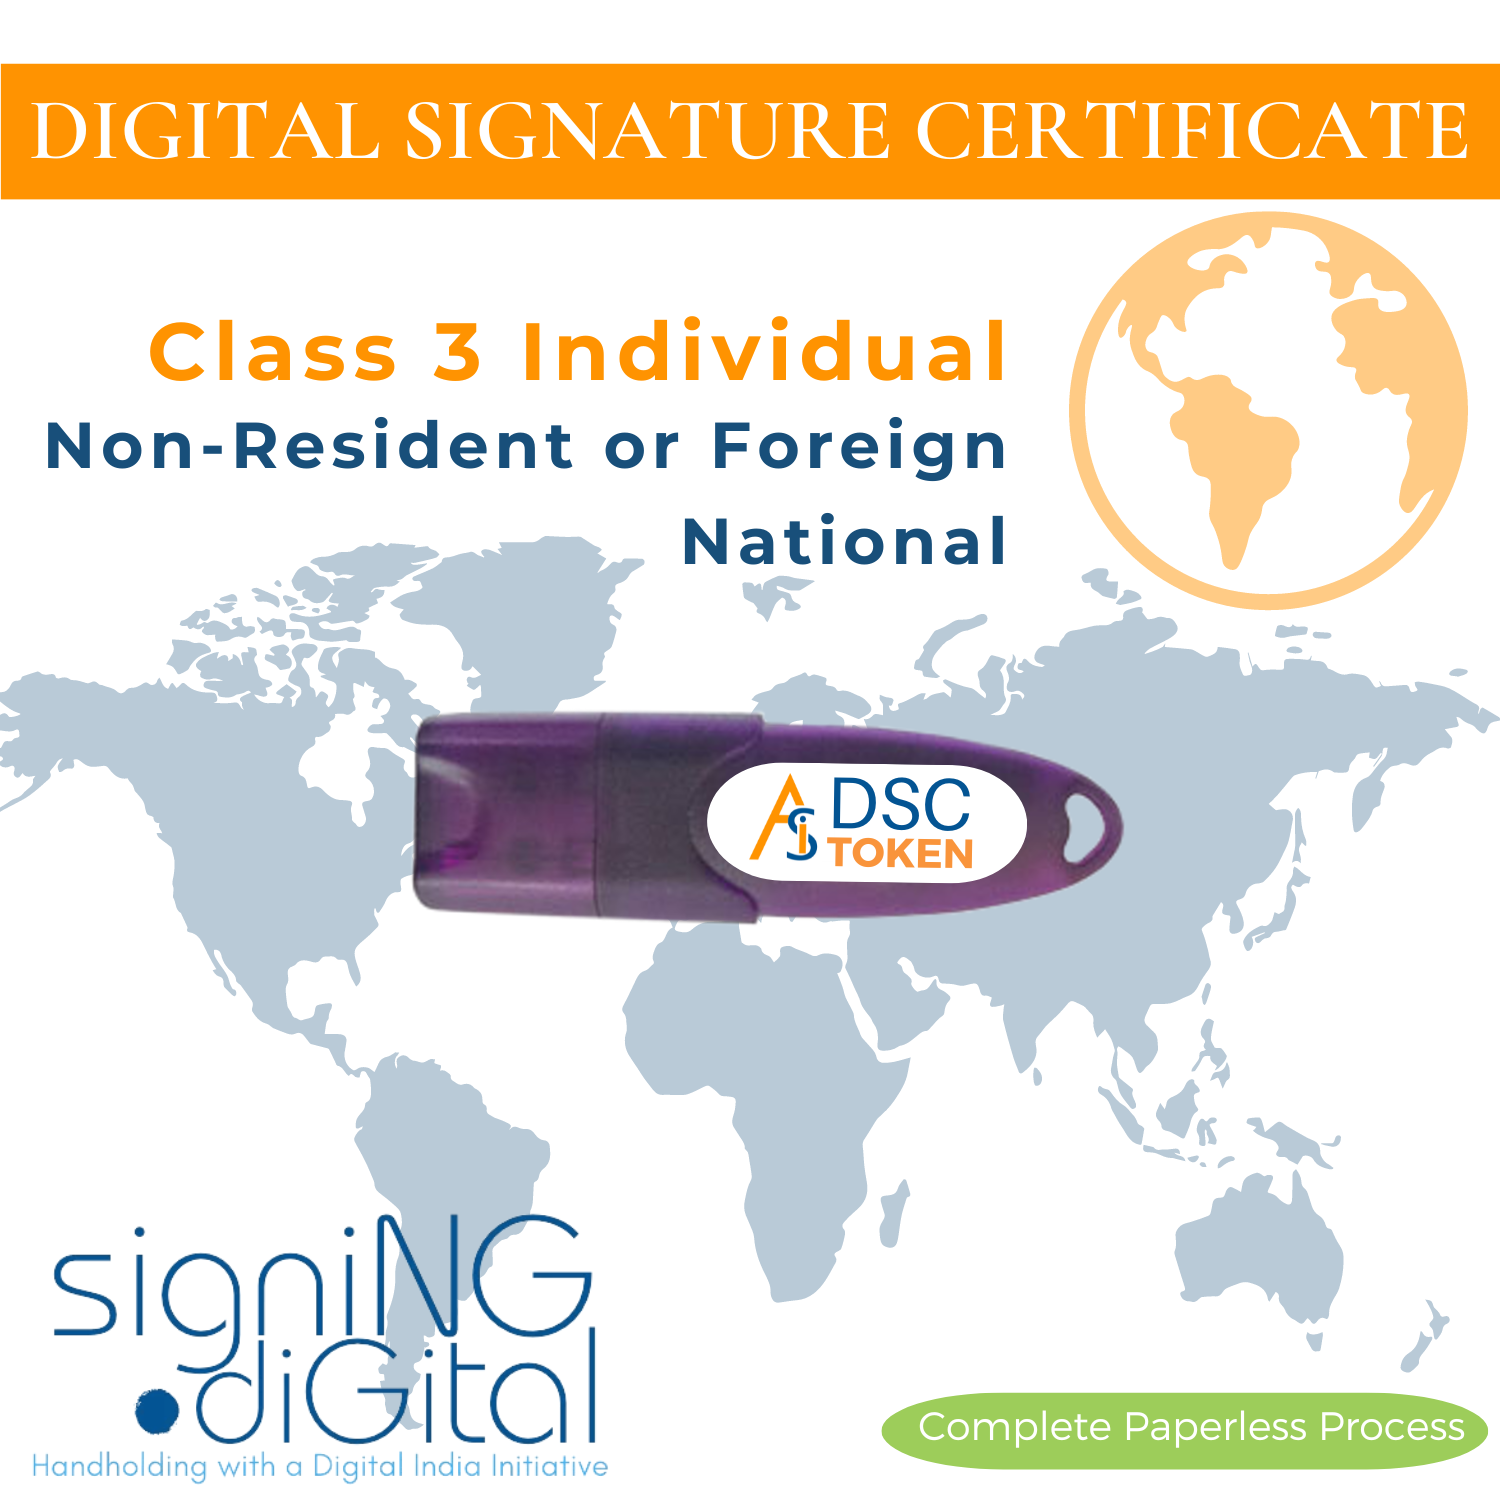 A digital signature type suitable for non-residents in India, offering secure authentication and compliance for international users